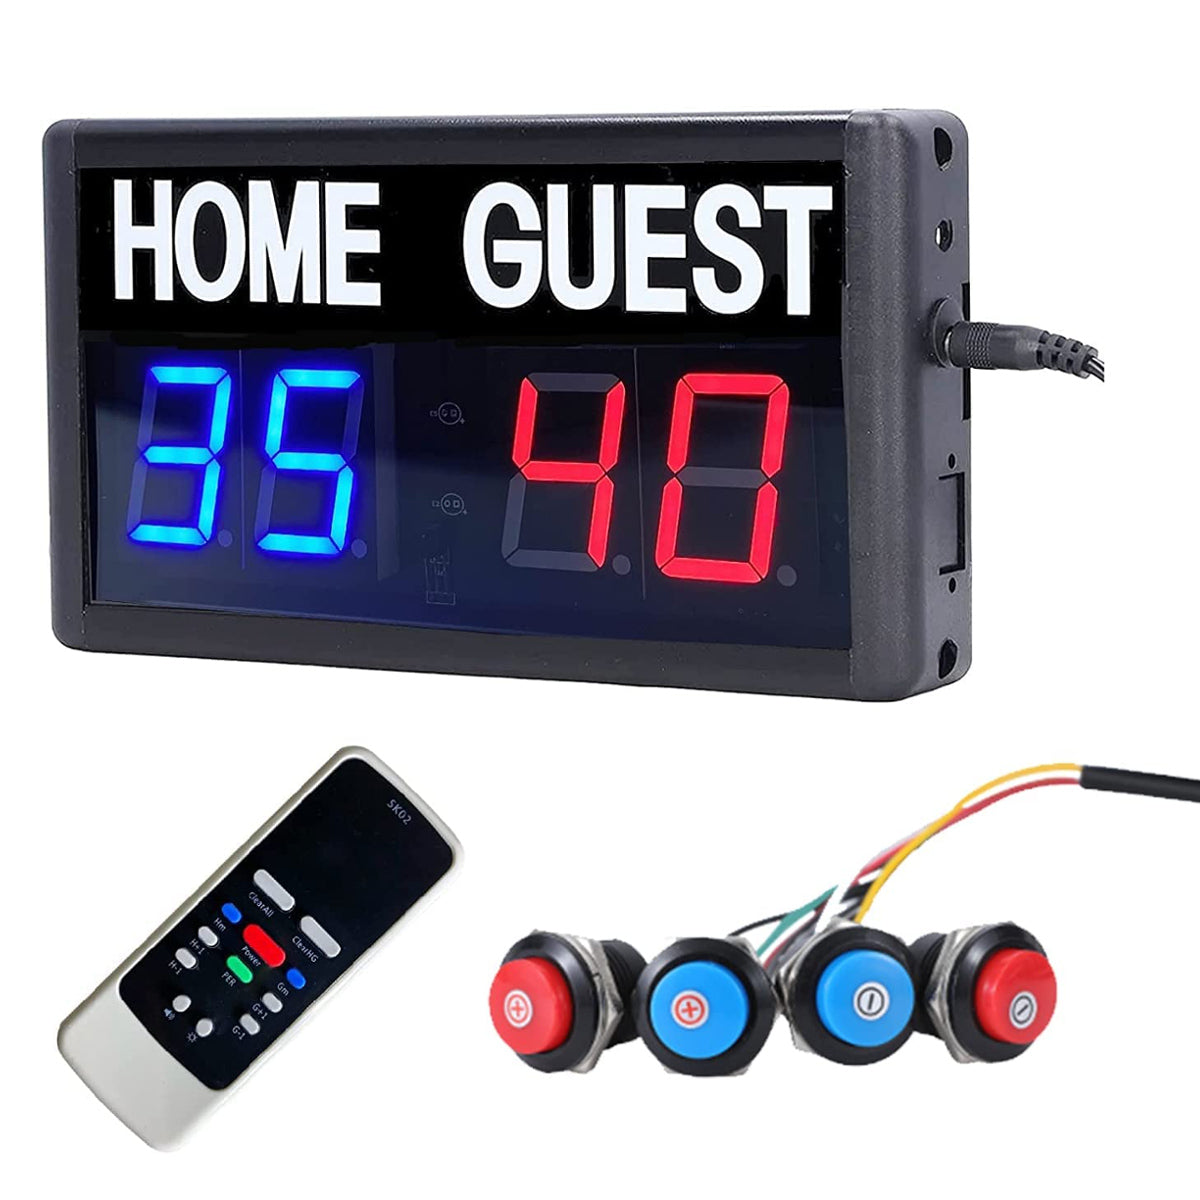 BTBSIGN Digital Electronic Scoreboard with Buttons